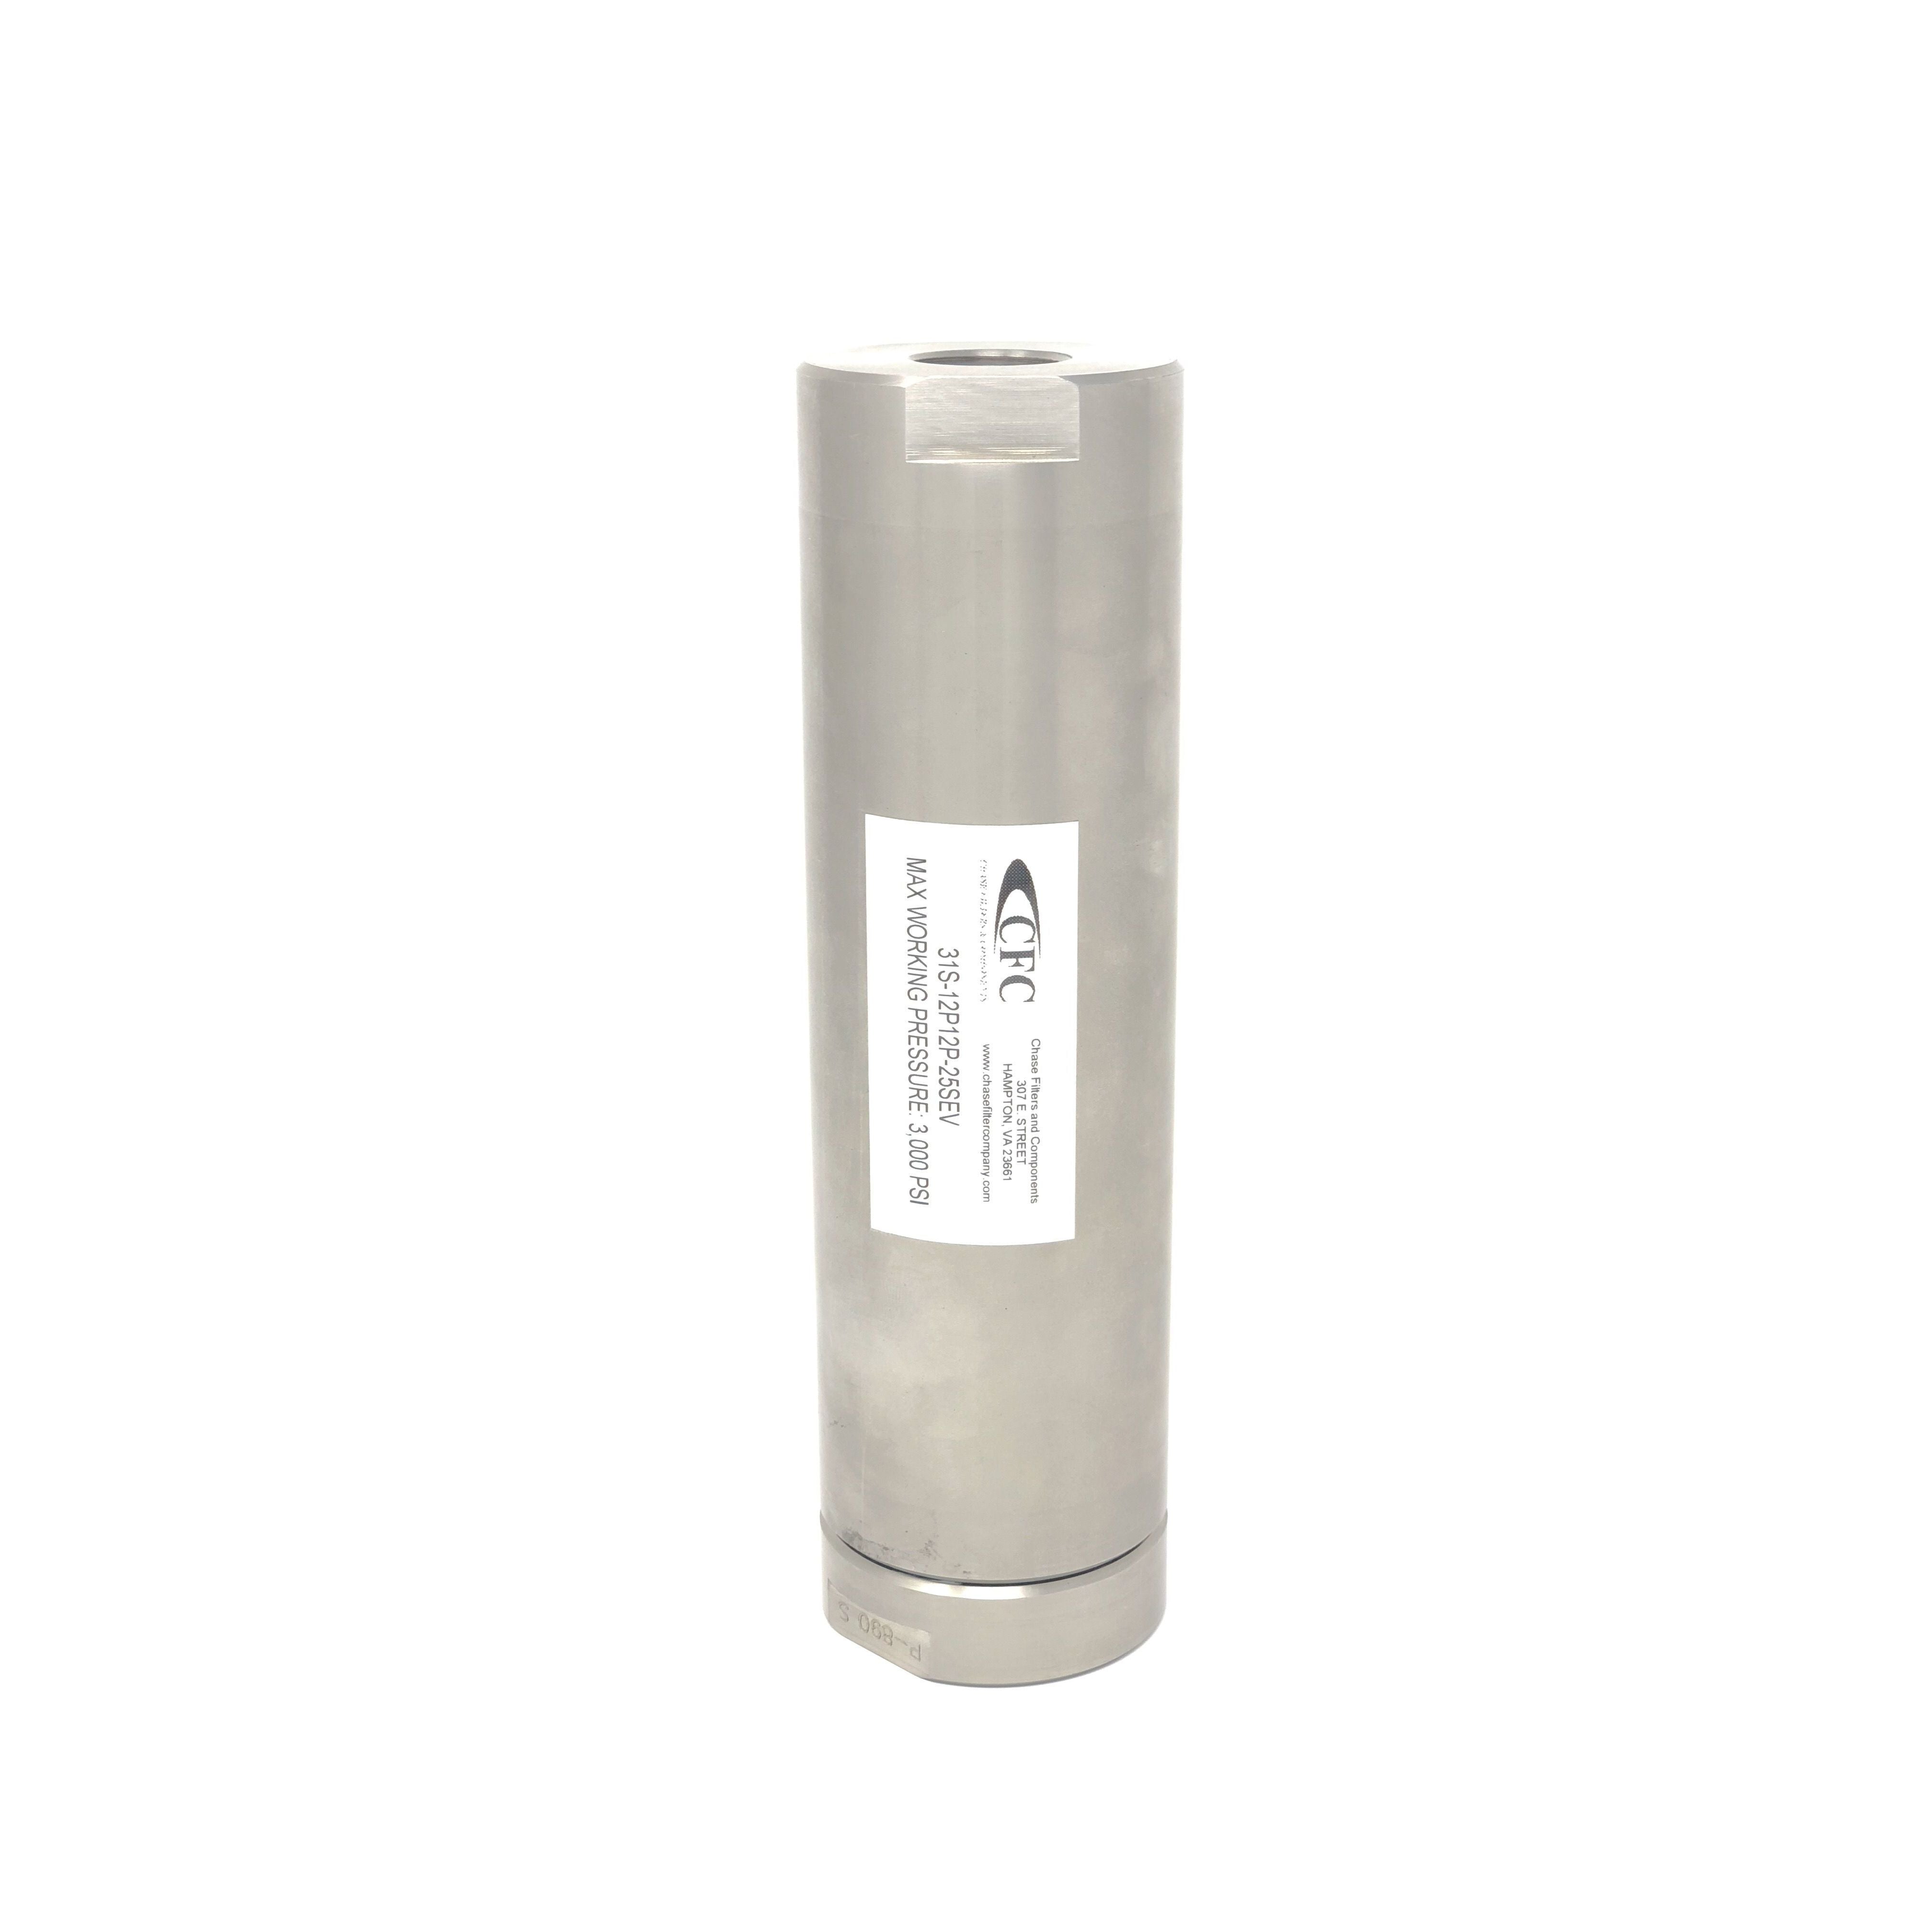 31S-16M16M-100SN : Chase High Pressure Inline Filter, 3000psi, #16 SAE (1"), 100 Micron, No Visual Indicator, No Bypass